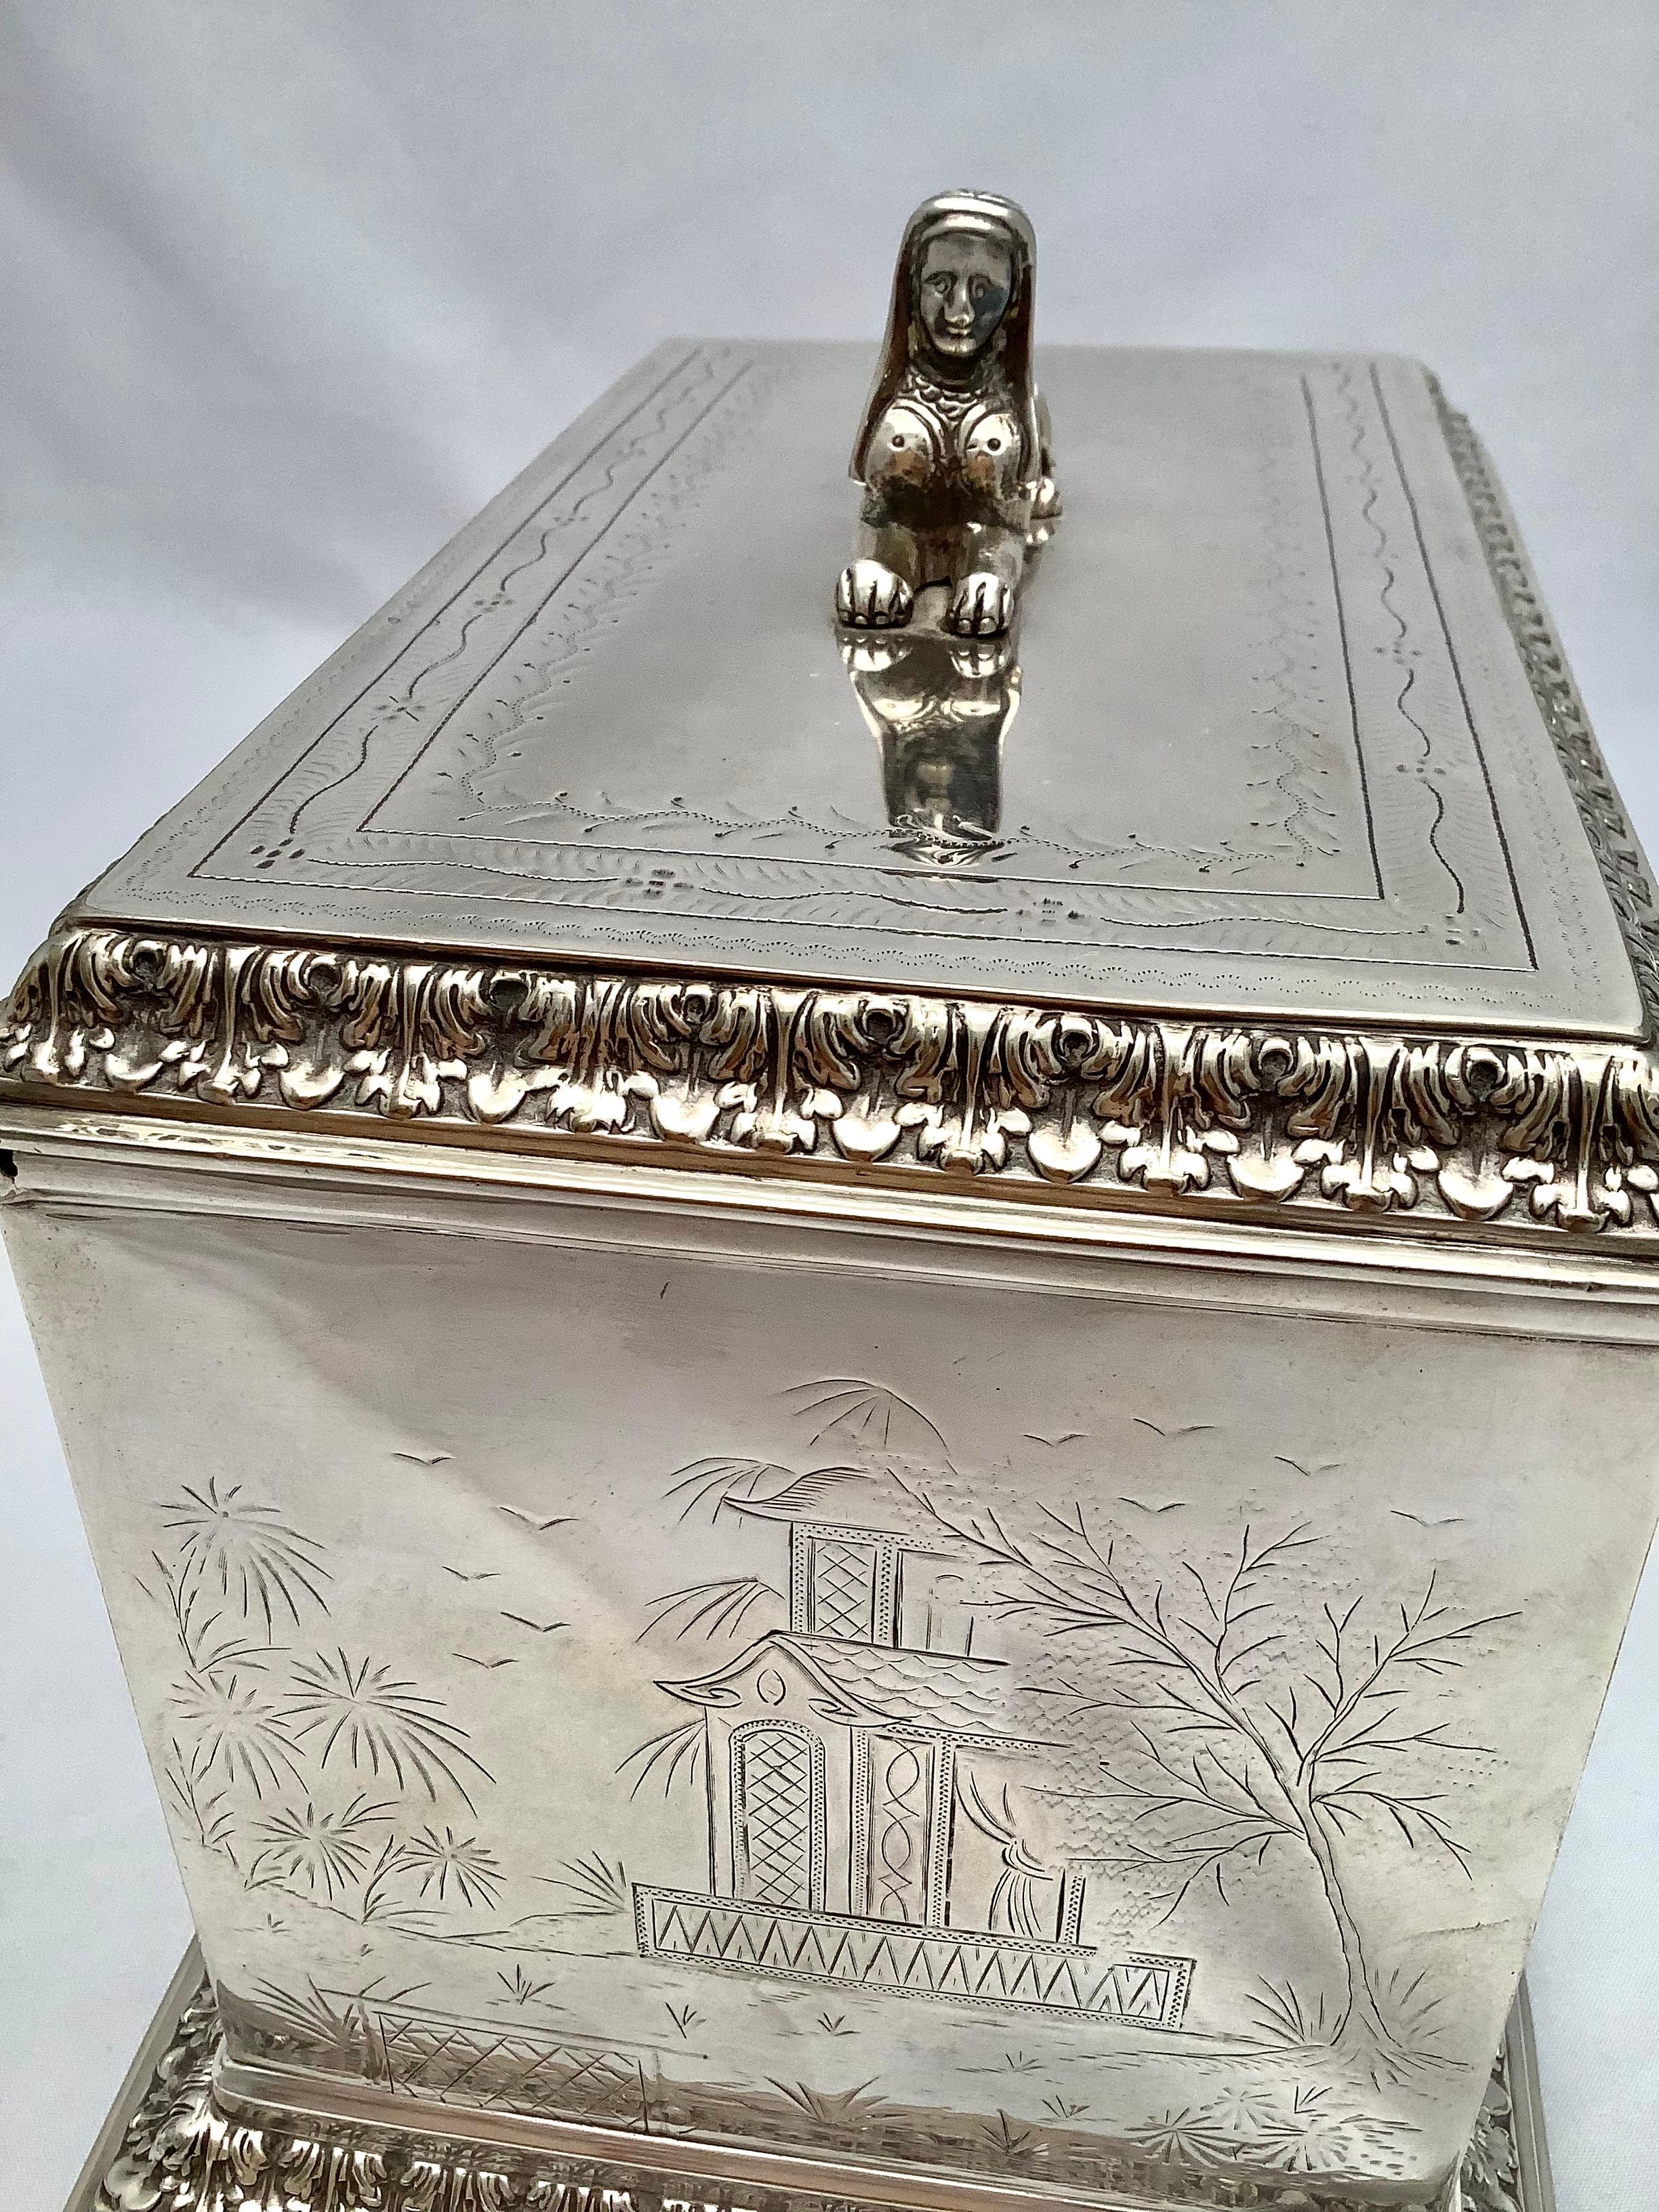 20th Century Silver Box with Asian Decorative Engraving